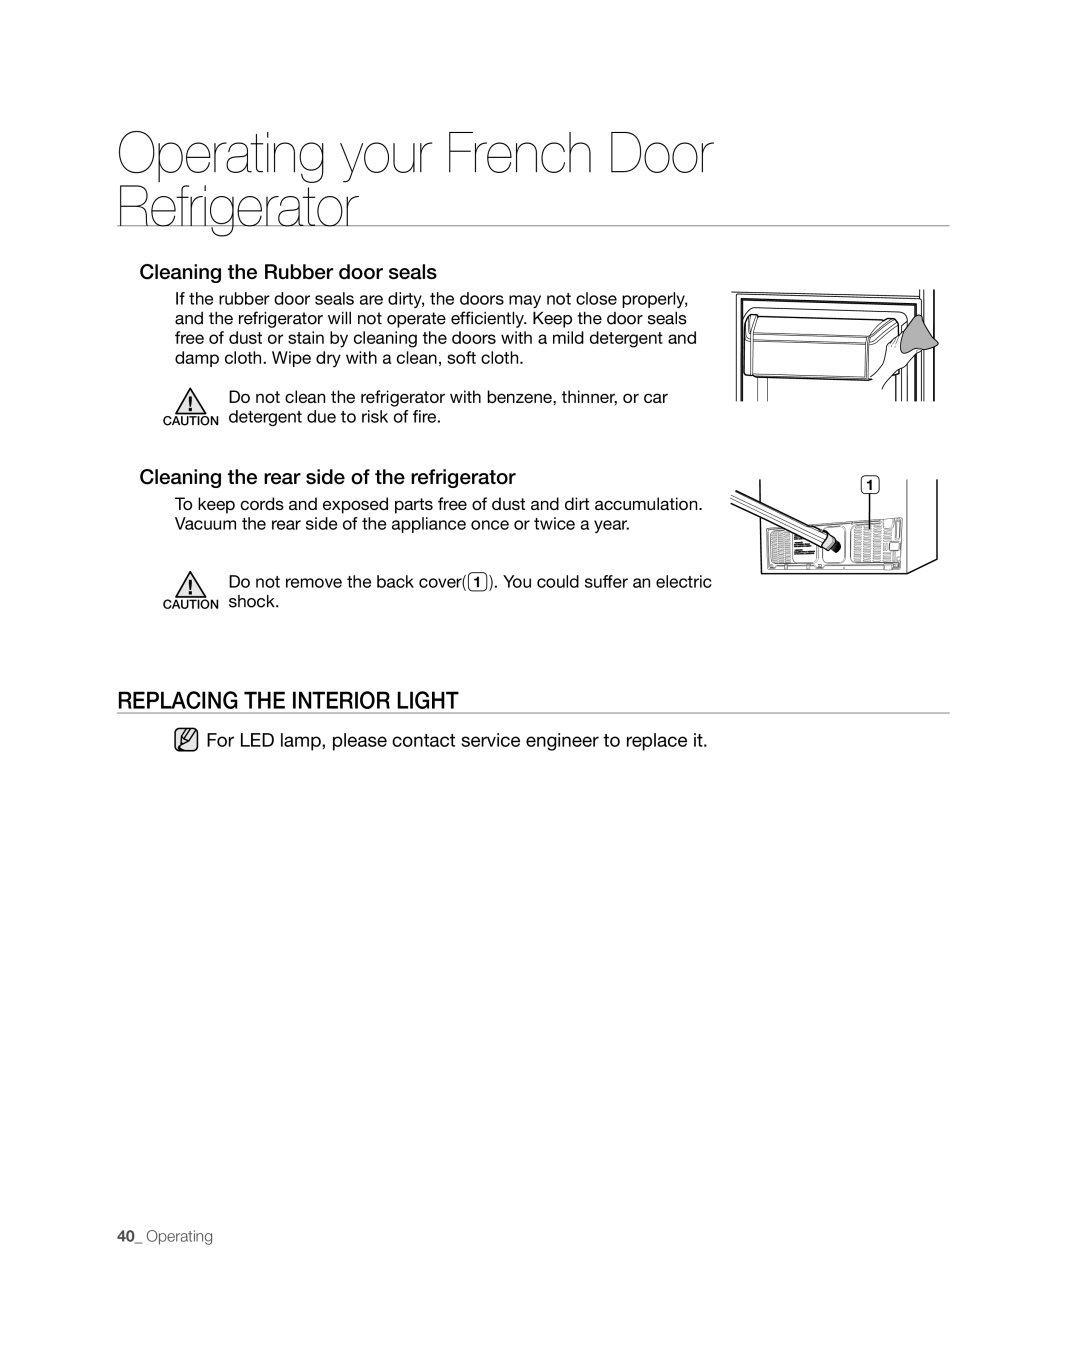 Samsung RFG238 Replacing The Interior Light, Operating your French Door Refrigerator, Cleaning the Rubber door seals 